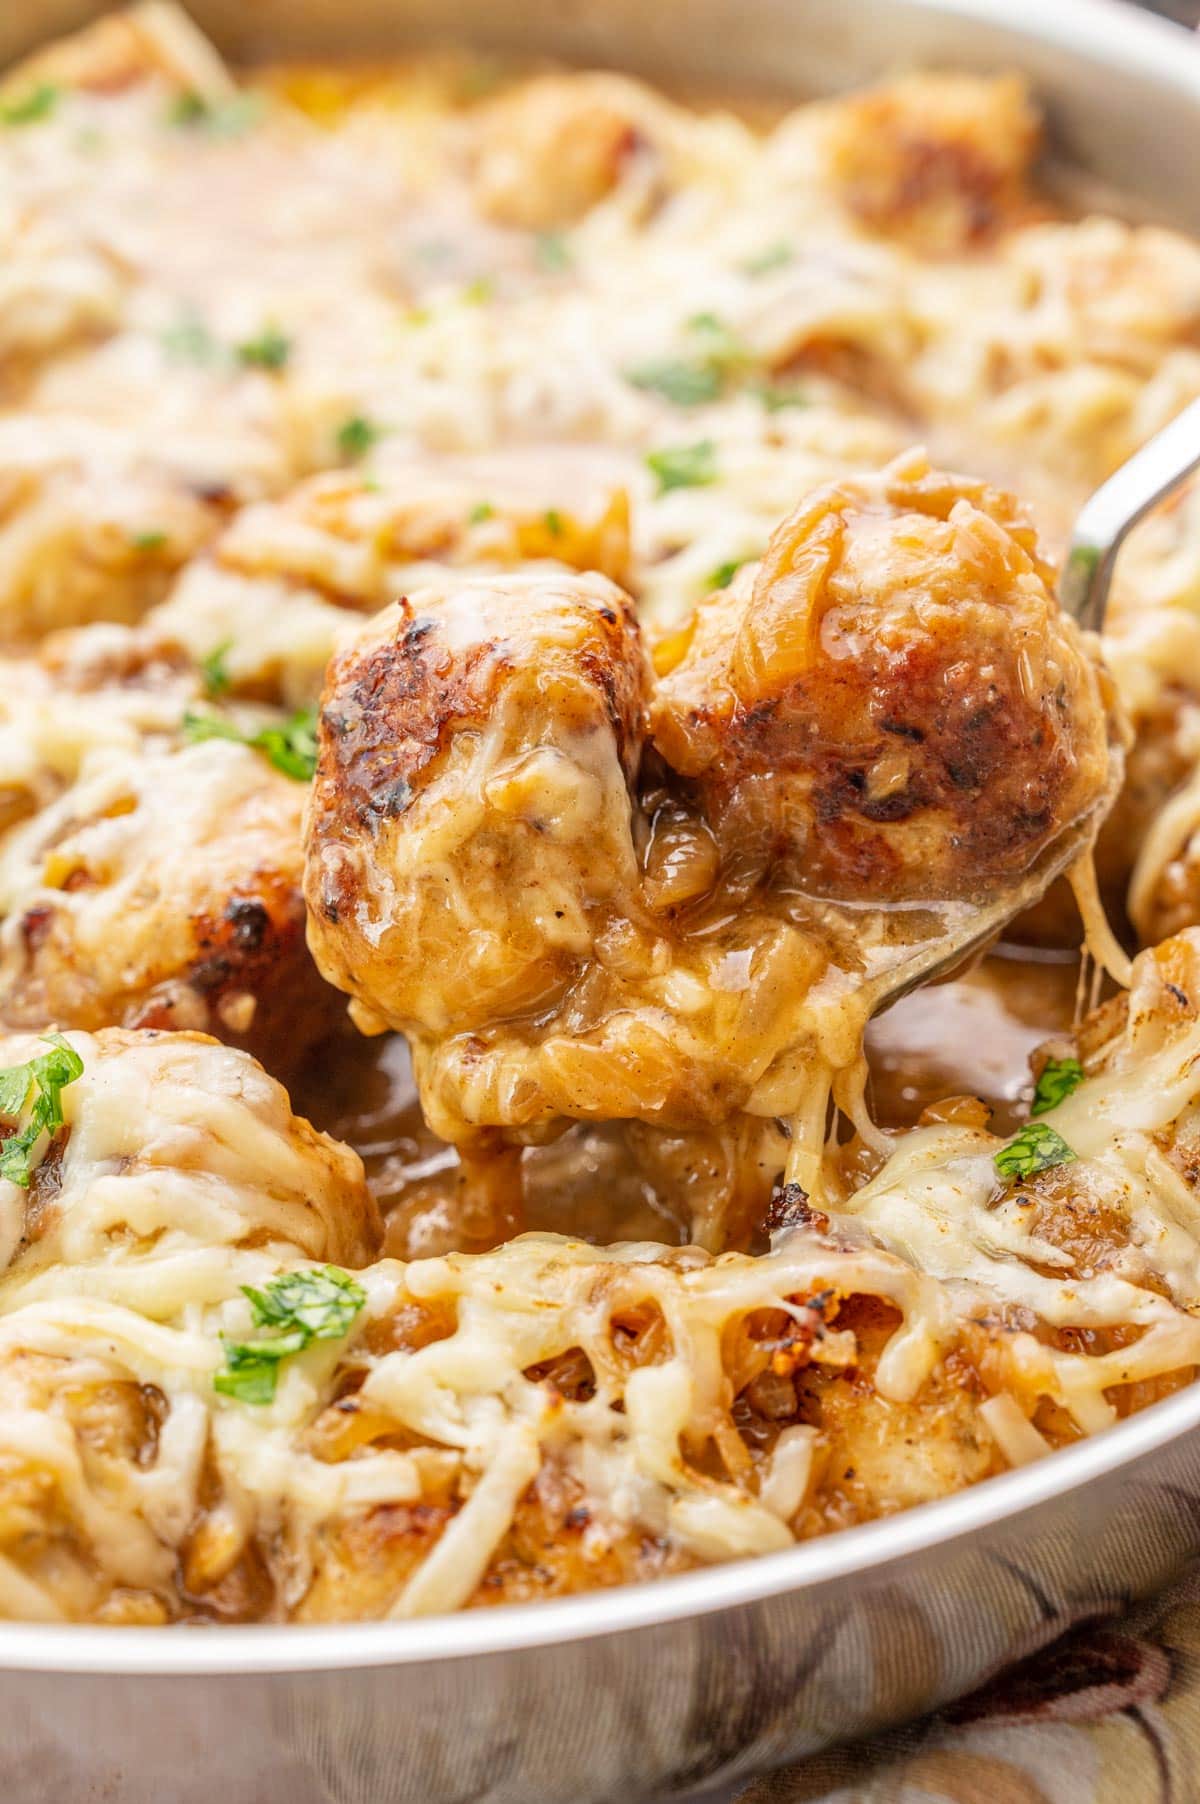 A close up photo of French onion meatballs in a pan. Two meatballs with melted cheese are on a spoon.